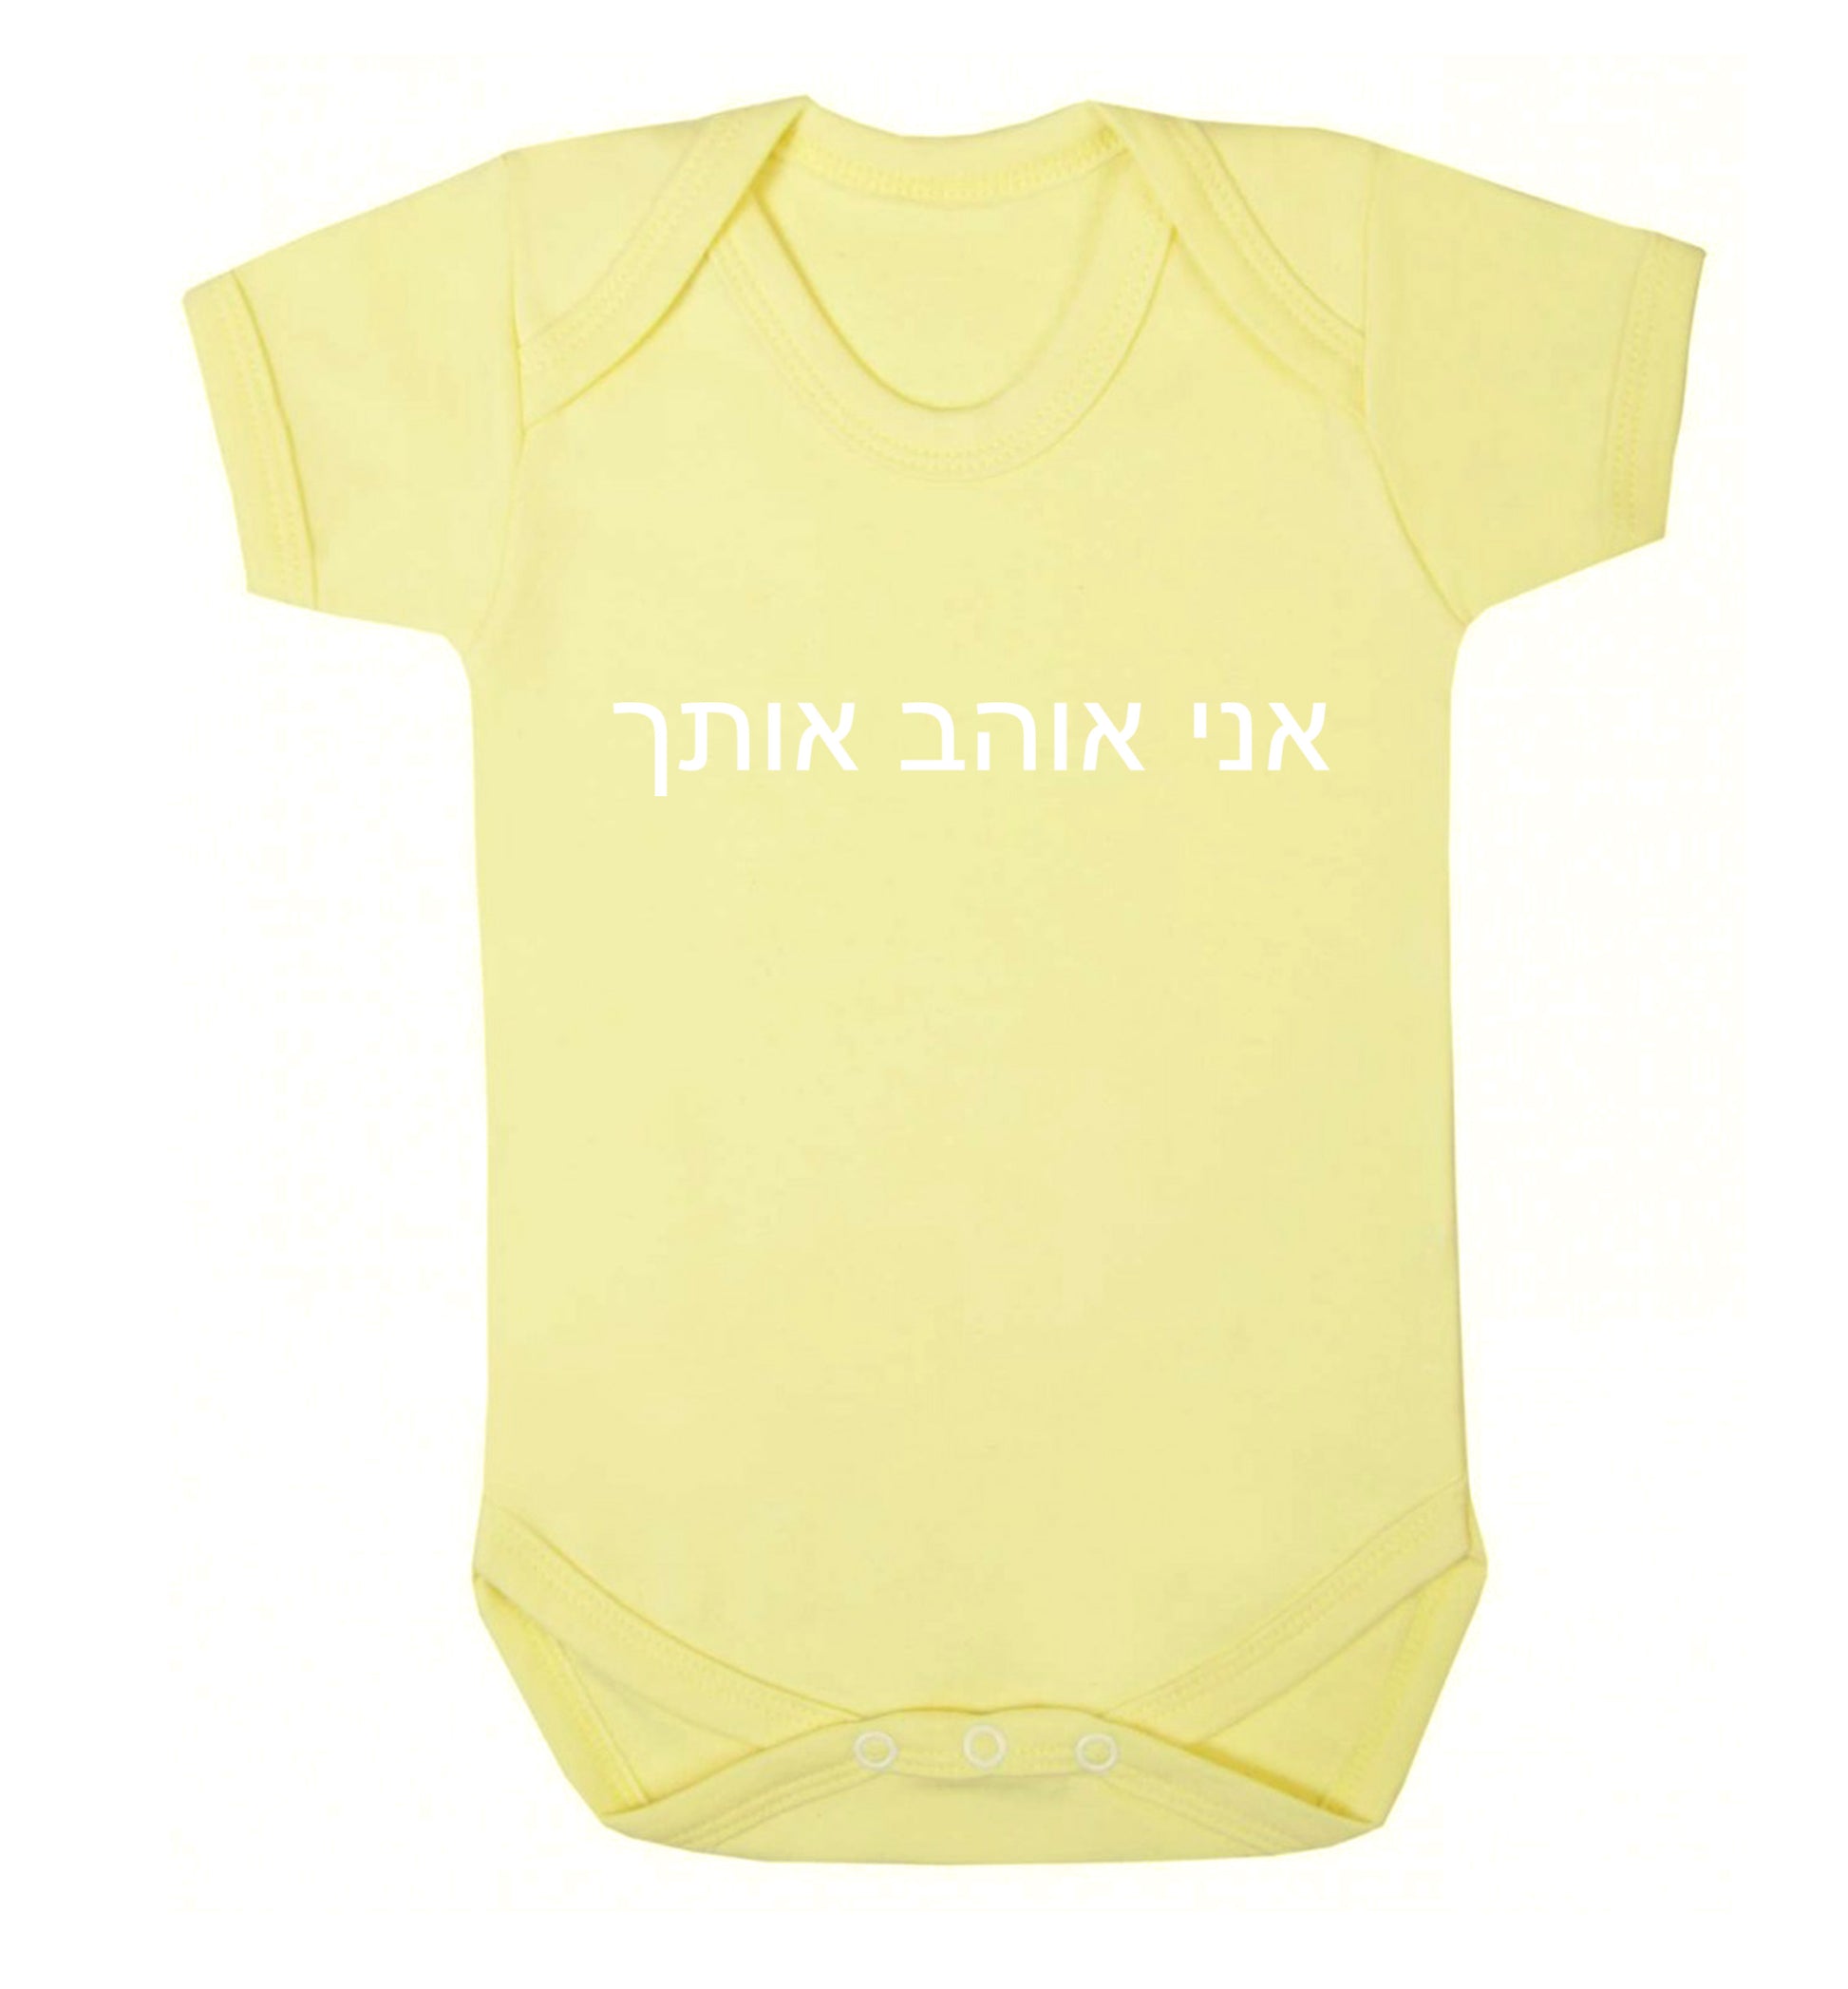 ___ ____ ____ - I love you Baby Vest pale yellow 18-24 months